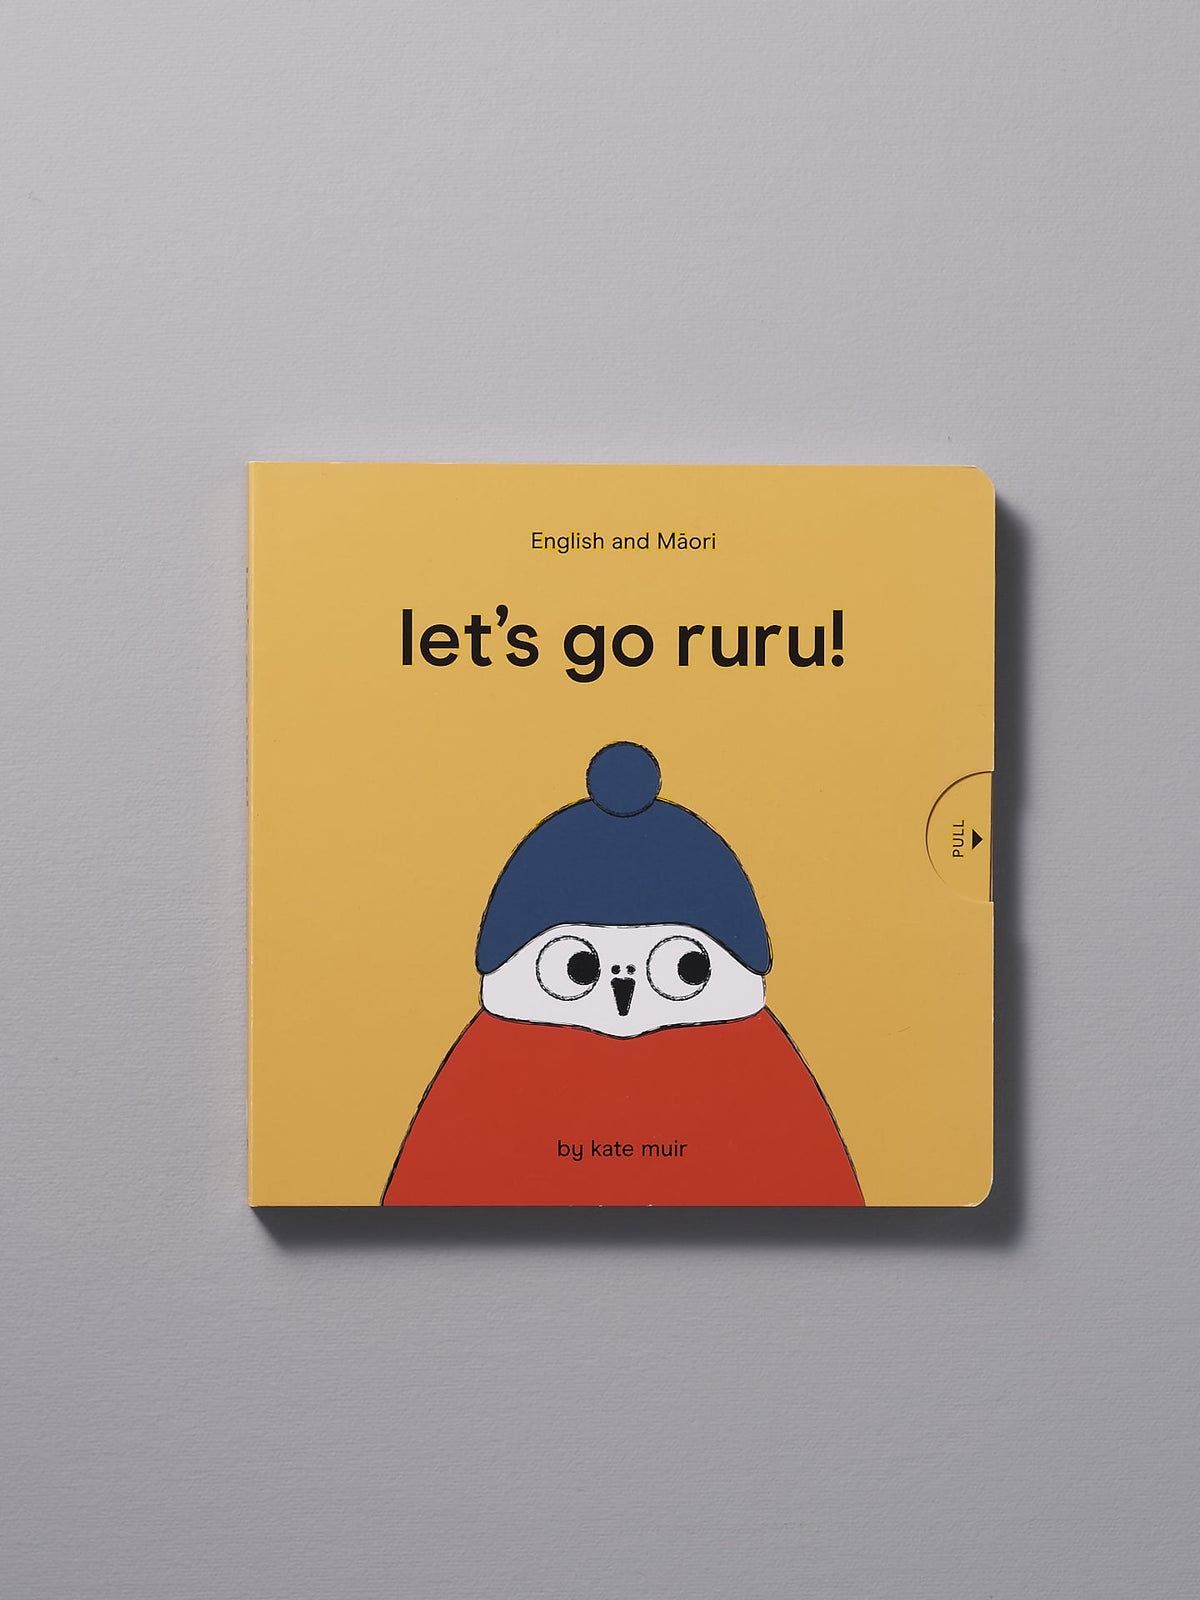 A children&#39;s book titled &quot;Let&#39;s Go Ruru – by Kate Muir&quot;, an exciting adventure featuring English and Te Reo Maori languages, with an illustration of a cartoon owl on the cover